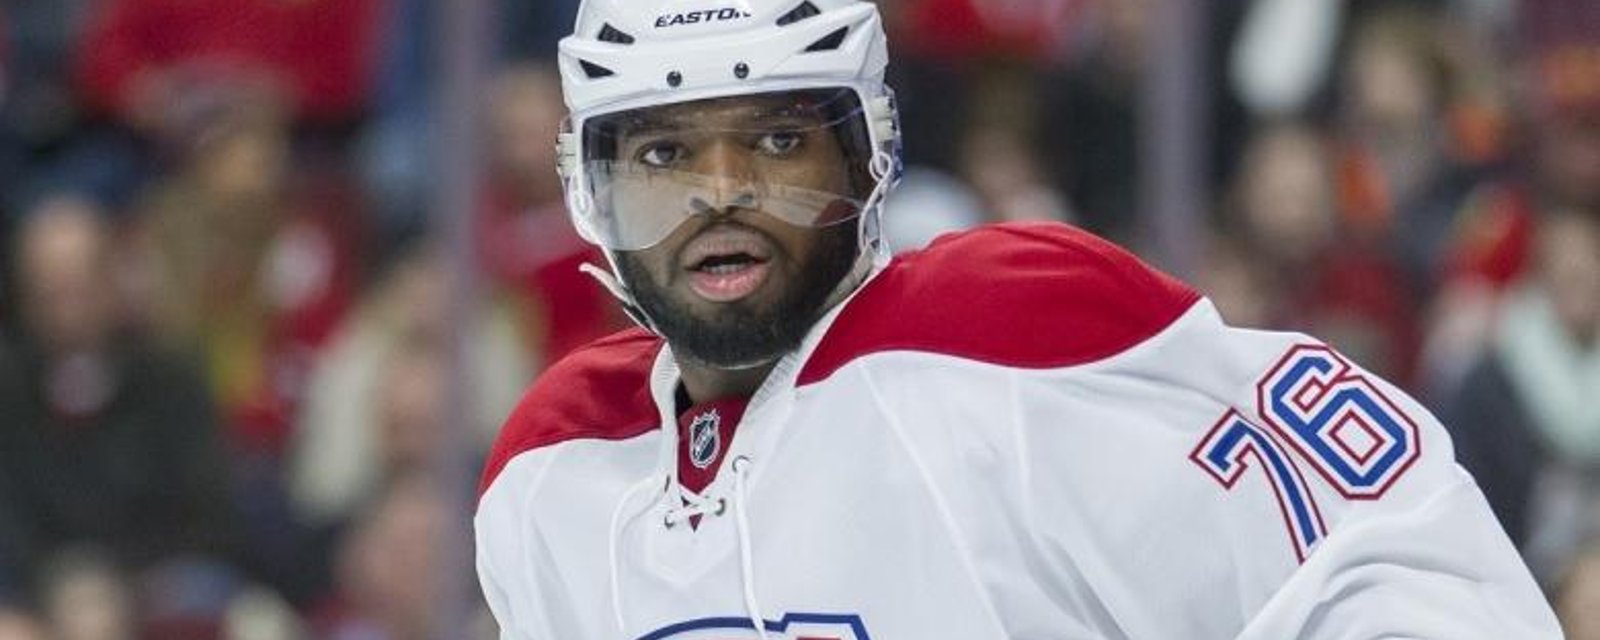 P.K. Subban blasts player for questionable hit, says he has no respect for him.